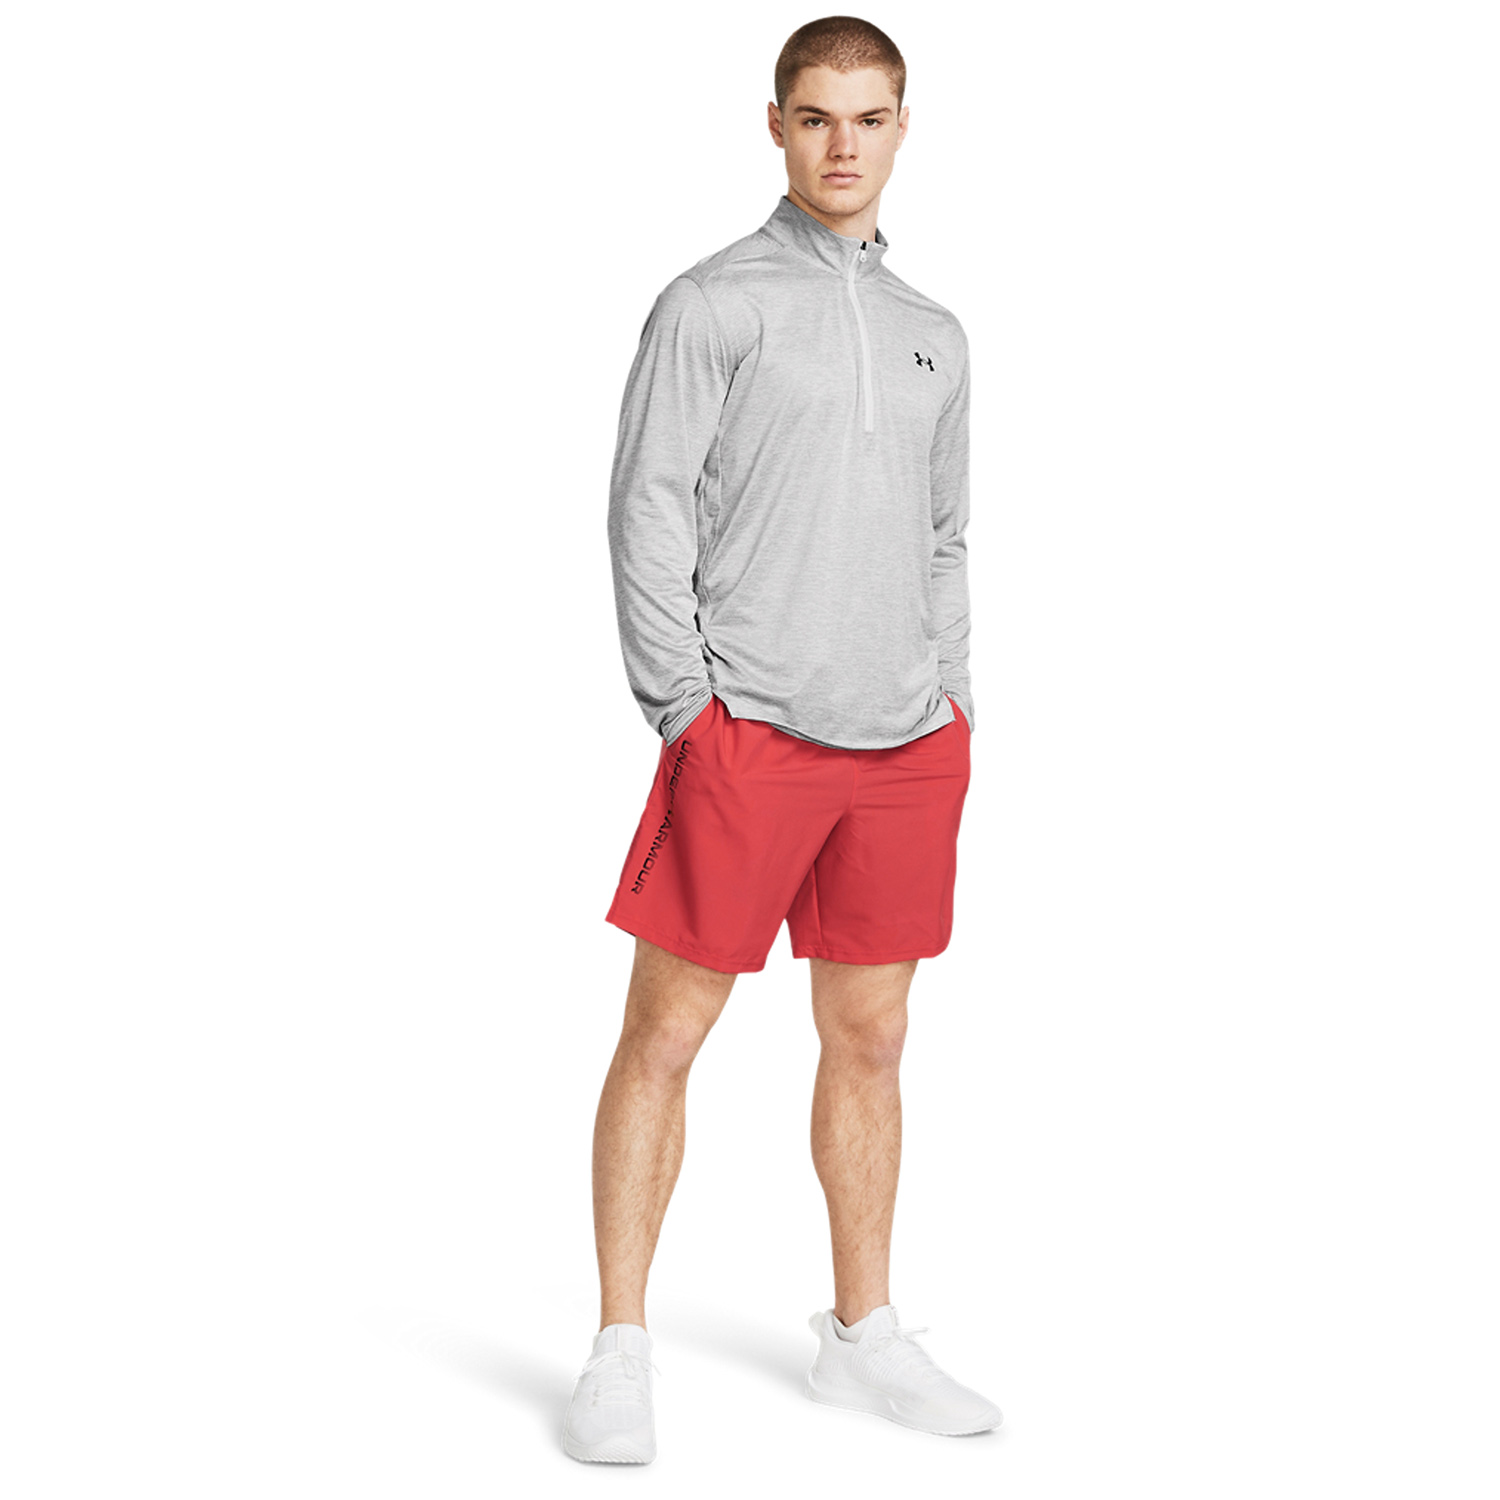 Under Armour Woven Split 9in Shorts - Red Solstice/Black